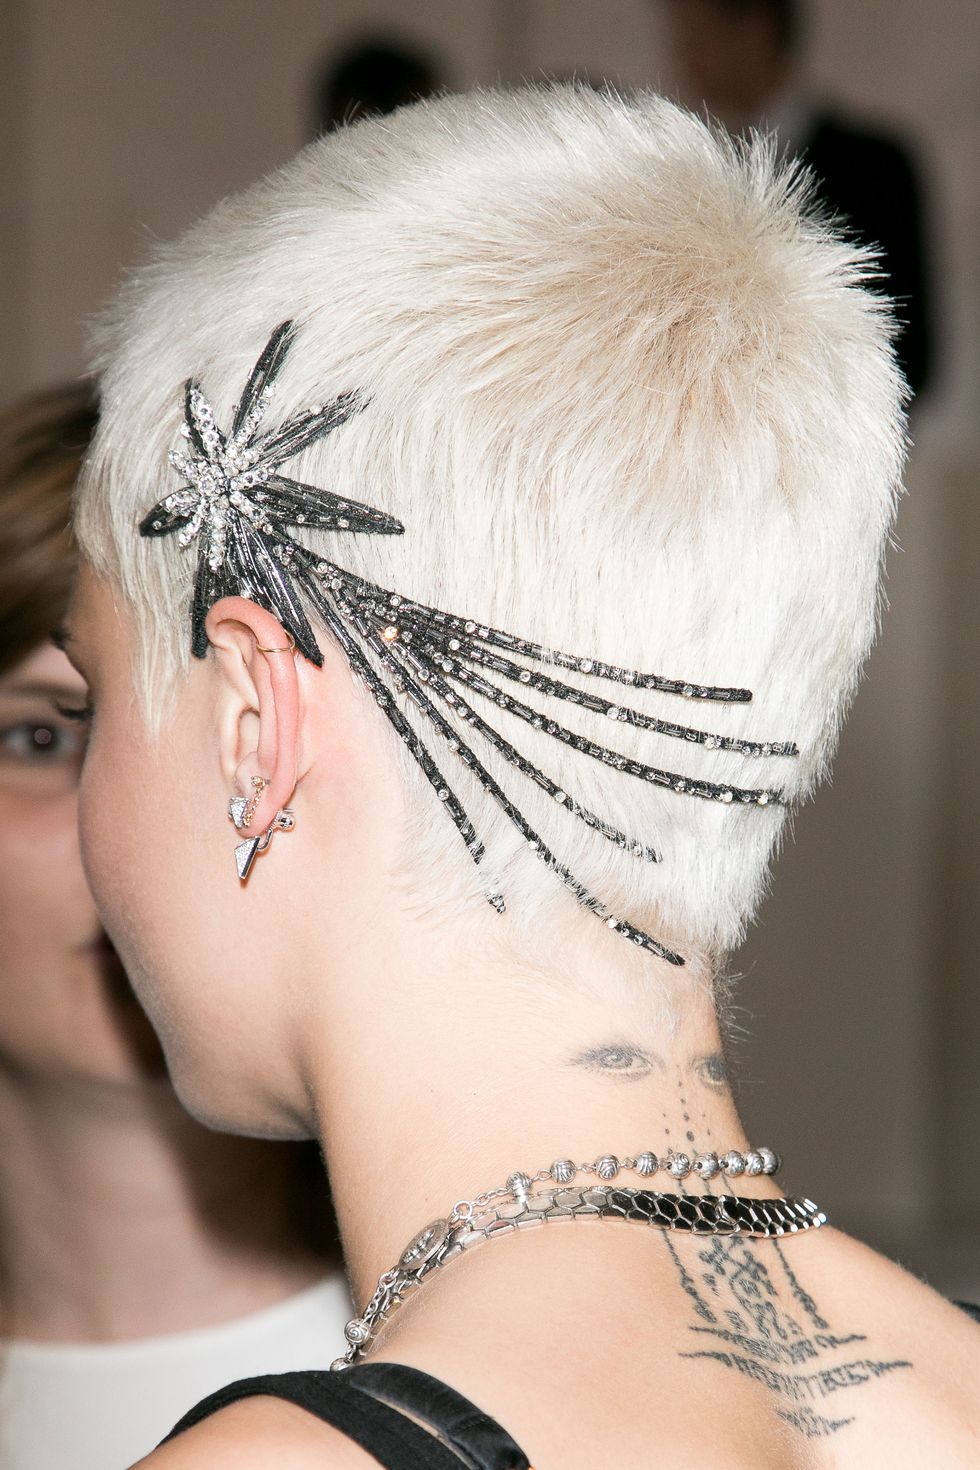 Cara Delevingne's couture hair accessory